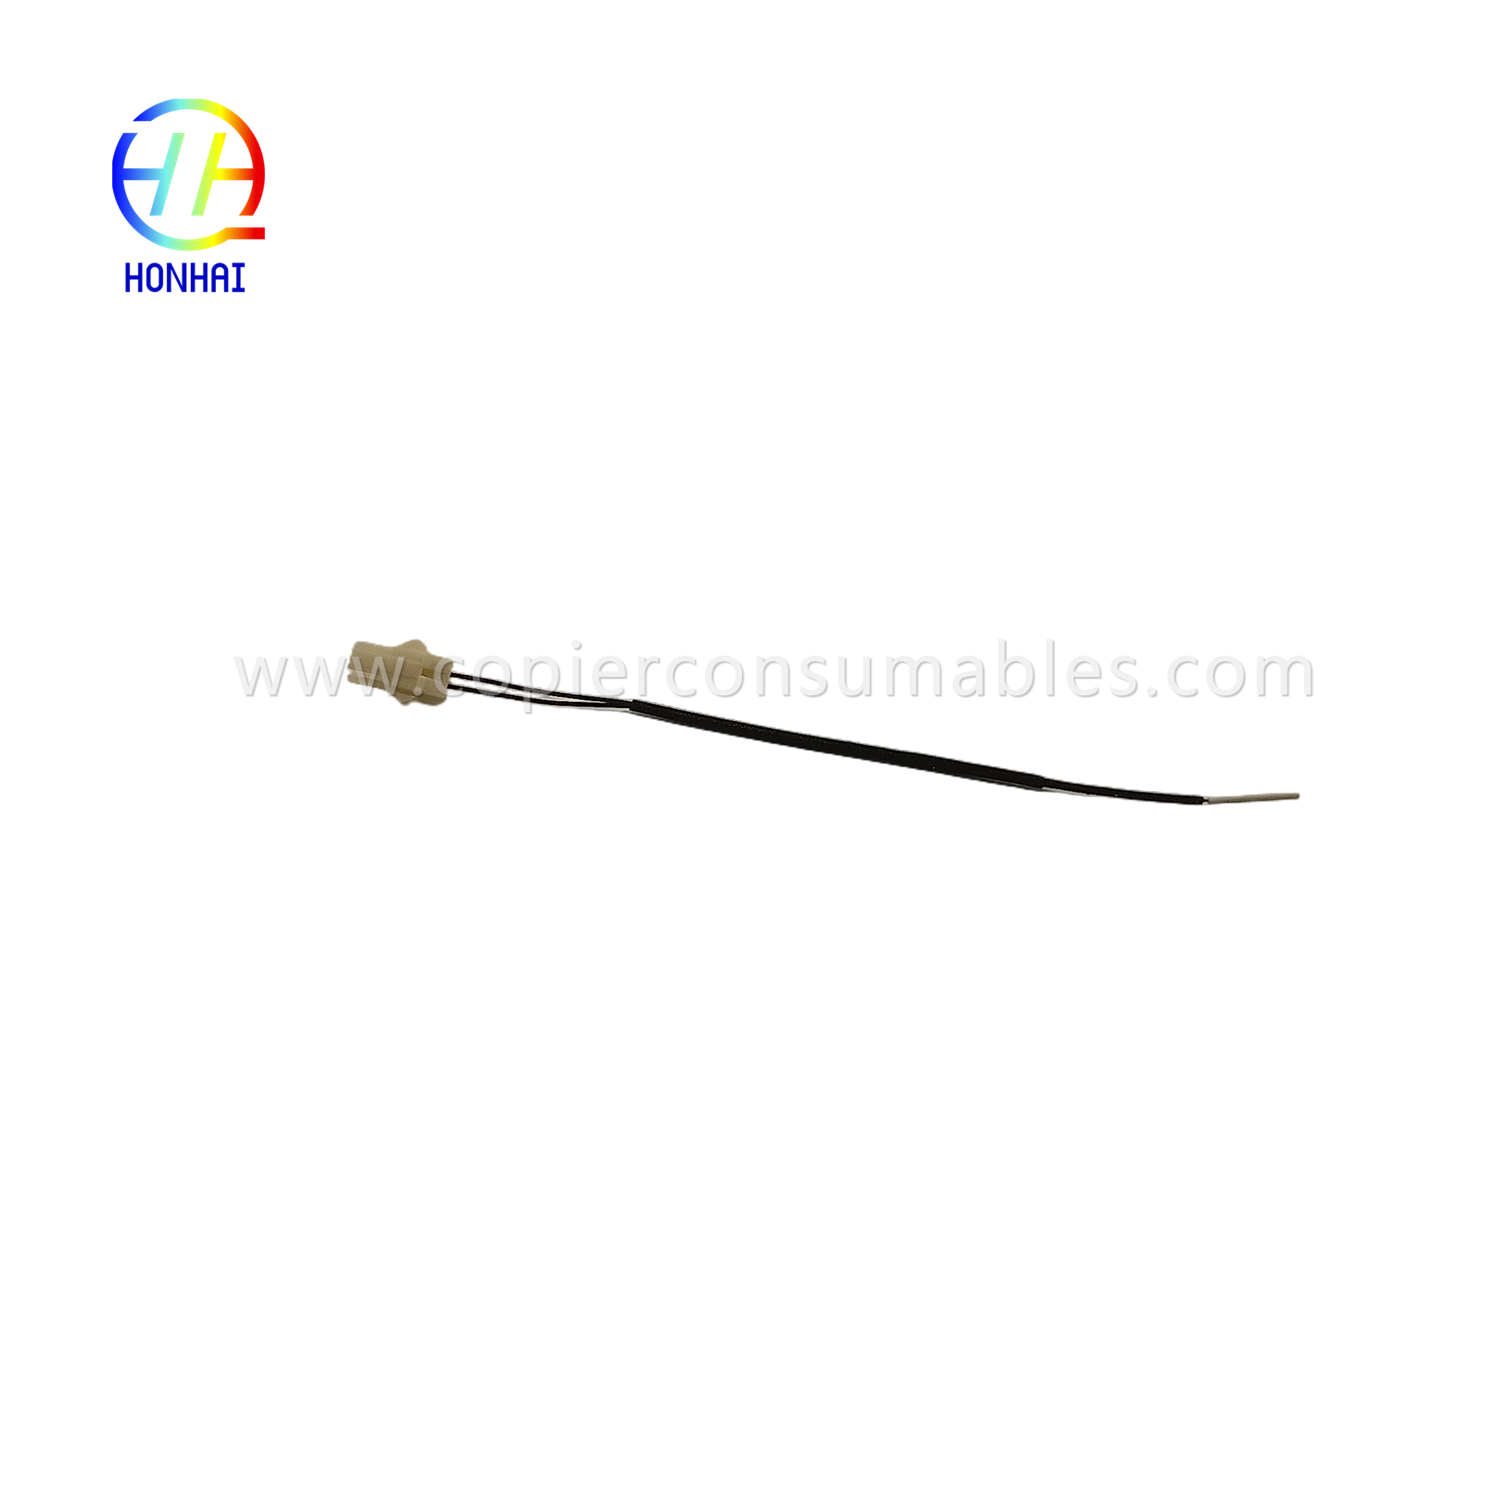 Fuser Thermistor for OCE 9400 TDS300 TDS750PW300350